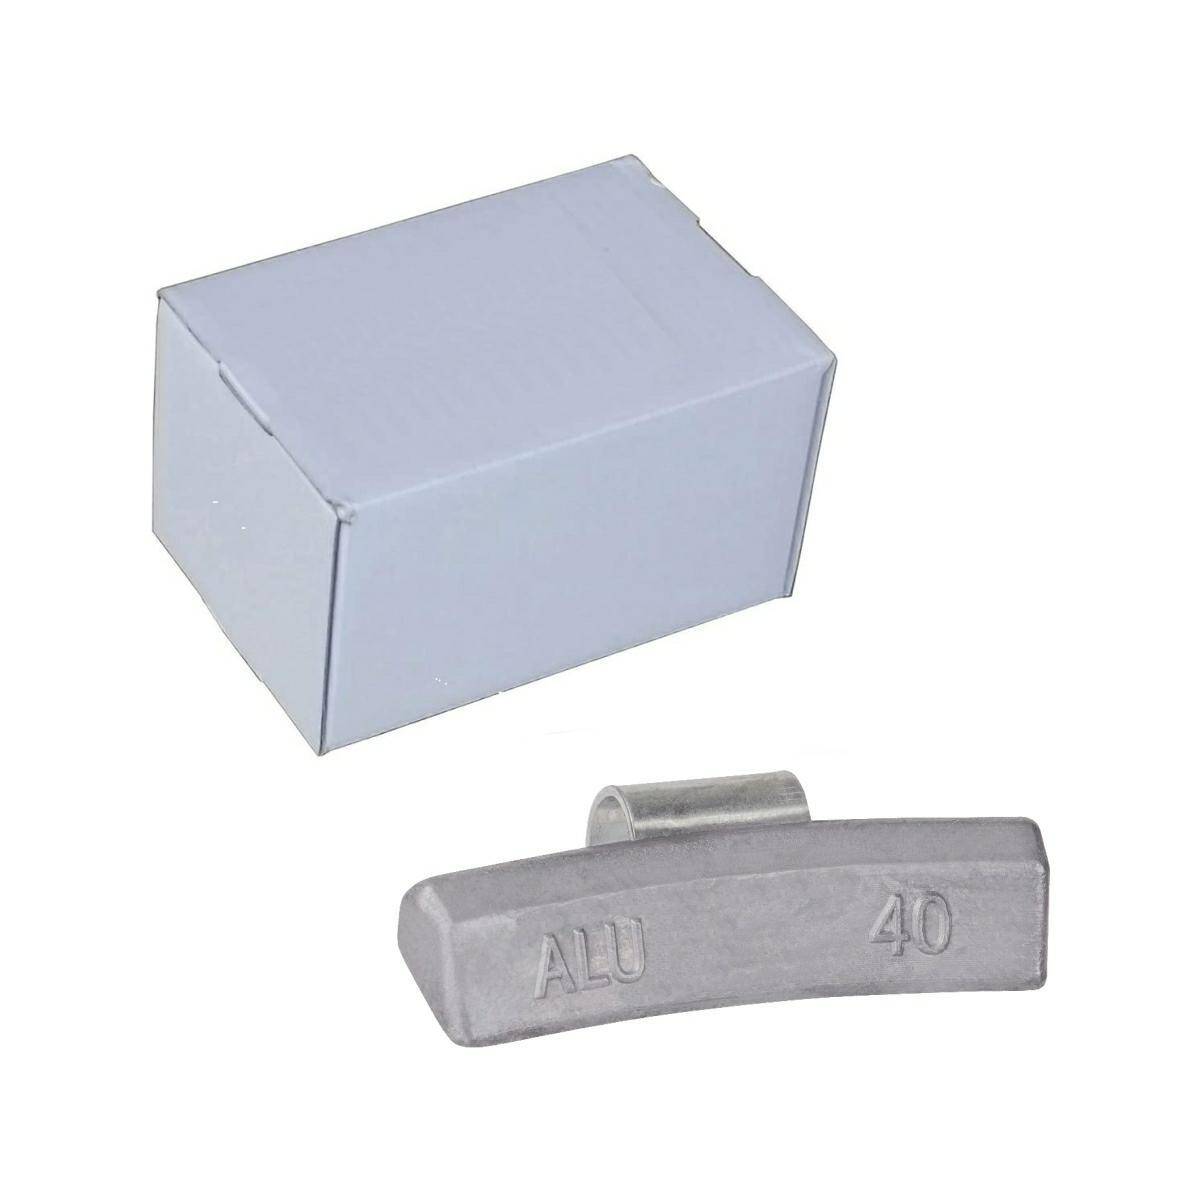 Lead stud weight ALU AT Type 608 45g (Pb) - pack of 50 (H608-45AT)